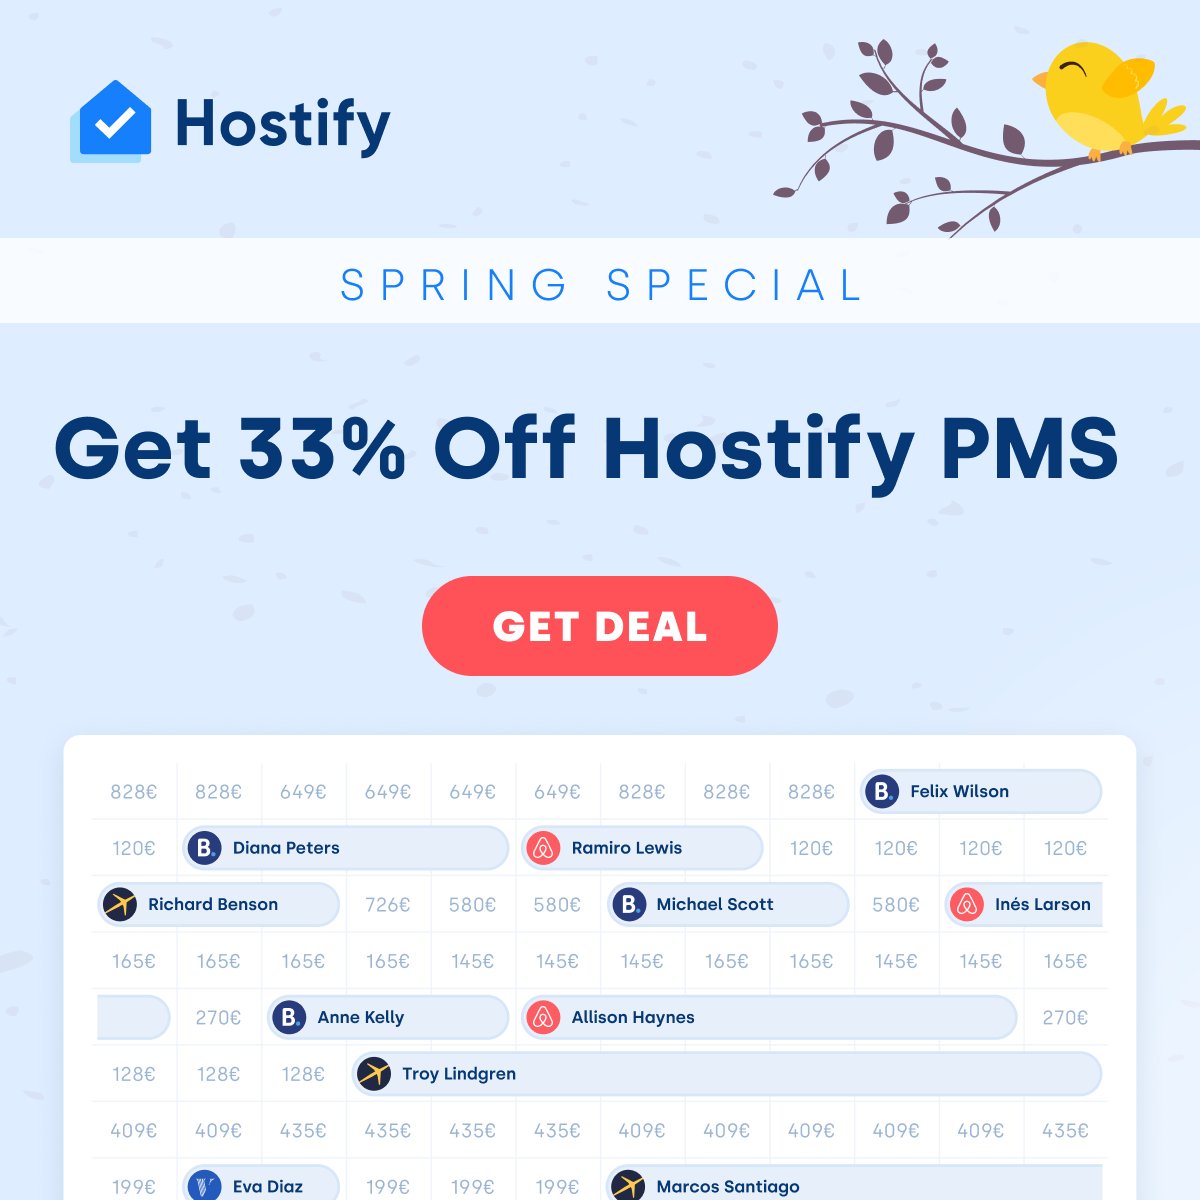 🔥Spring into action with our #softwarepromotion! Expand your visibility & boost your business with the ultimate technology. Centralize your #propertymanagement and automate your daily processes.
Don't miss this opportunity: bit.ly/3TDi8Qx

#springoffer #hostifydiscount